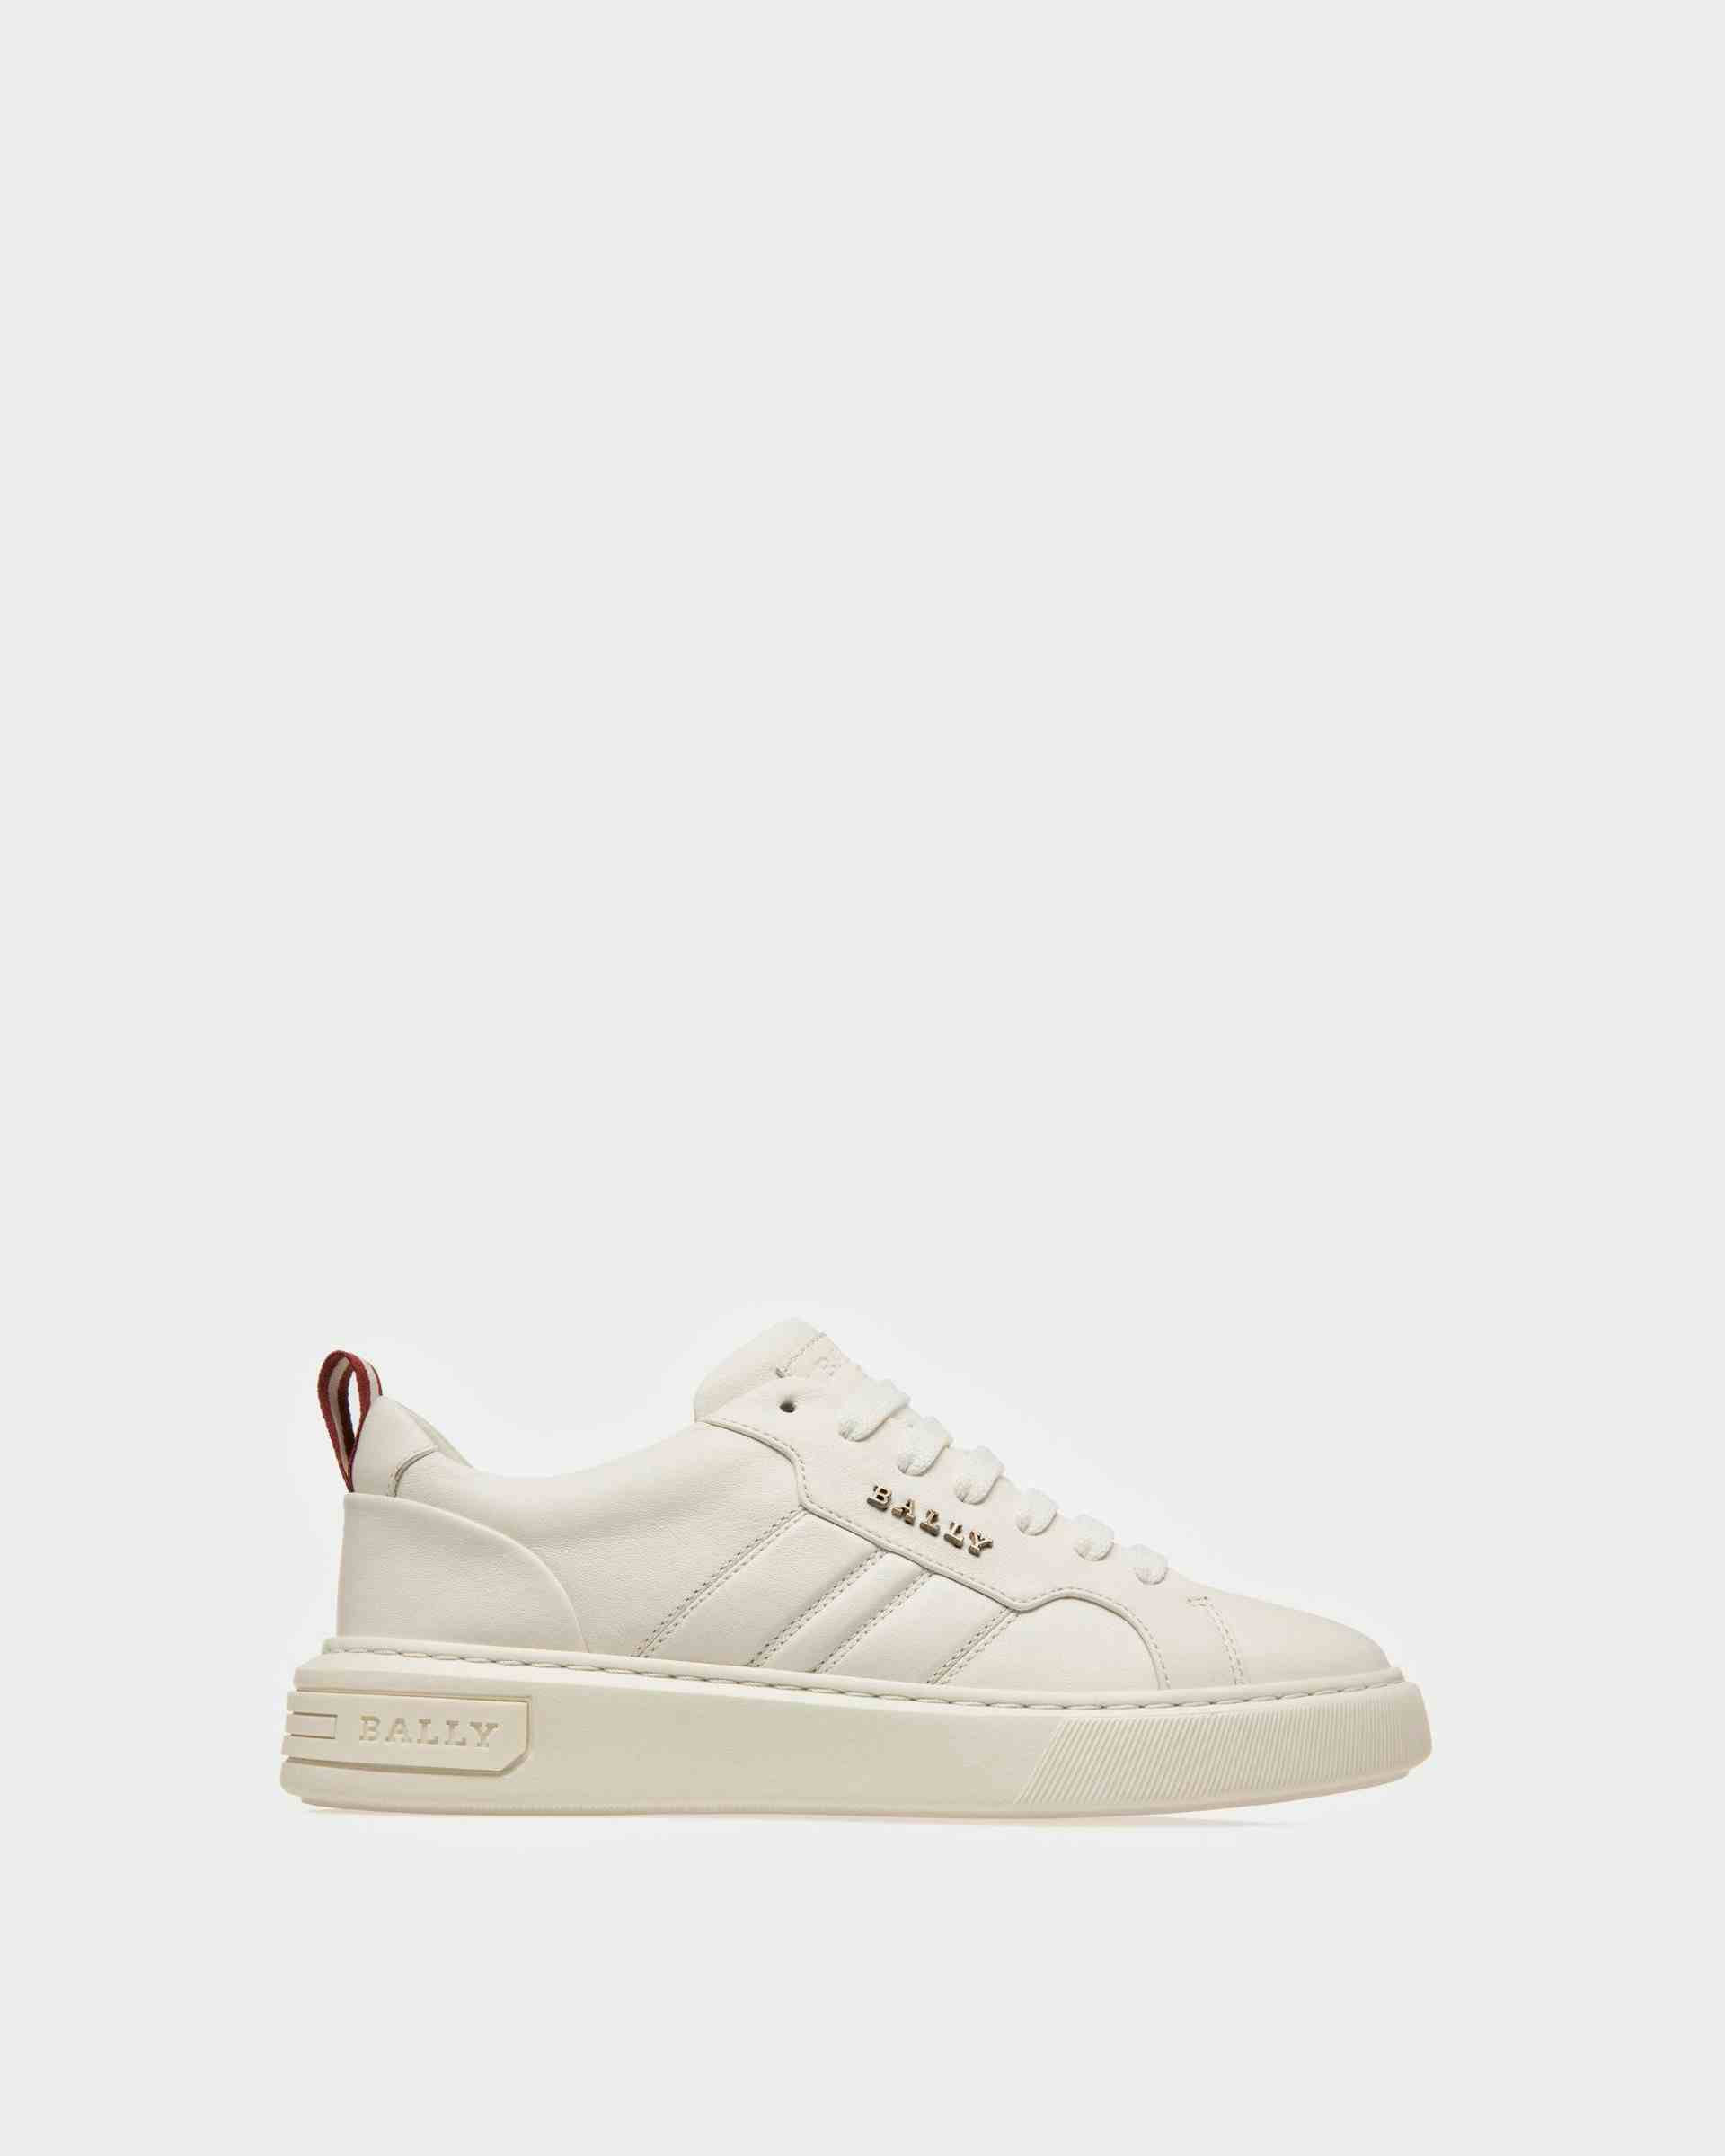 Maxim Leather Sneakers In White - Women's - Bally